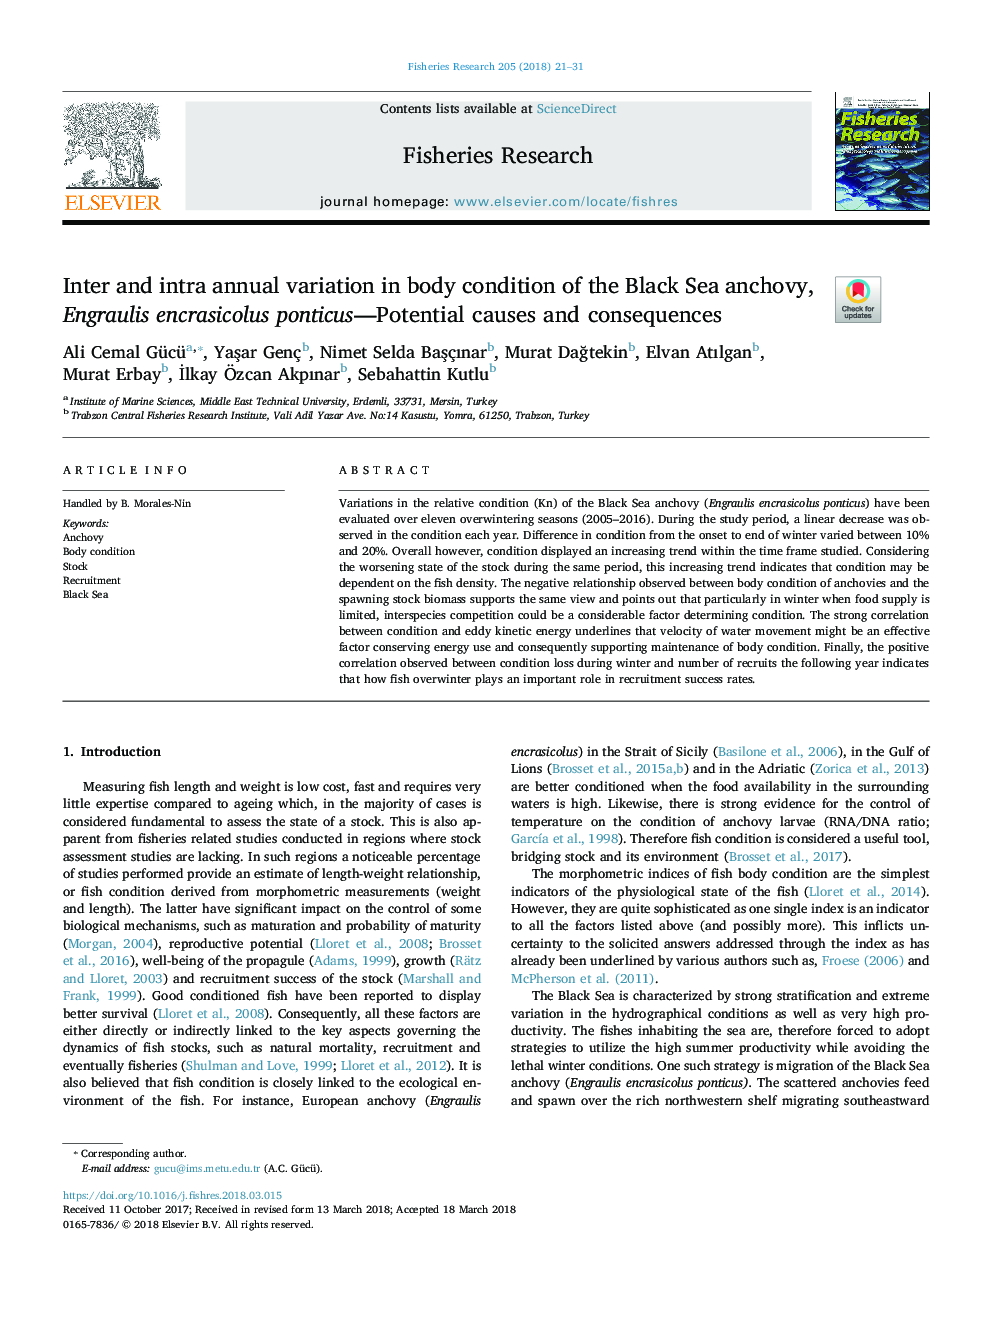 Inter and intra annual variation in body condition of the Black Sea anchovy, Engraulis encrasicolus ponticus-Potential causes and consequences